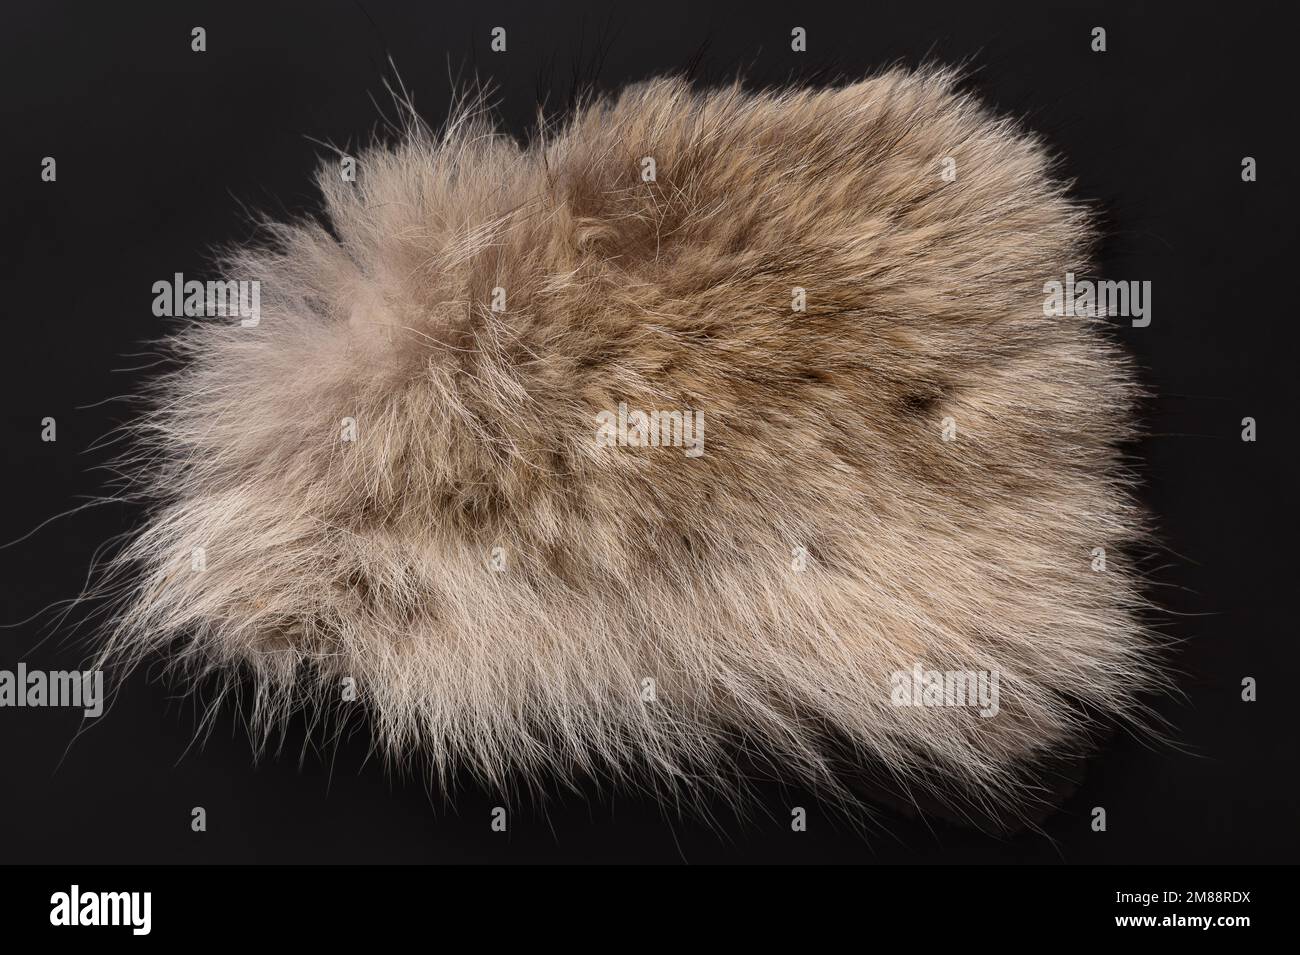 Real grey wolf fur, from above. Wolf pelt with silky, fluffy and bushy fur fibers, primarily used for scarfs. Thick growth of hair. Stock Photo